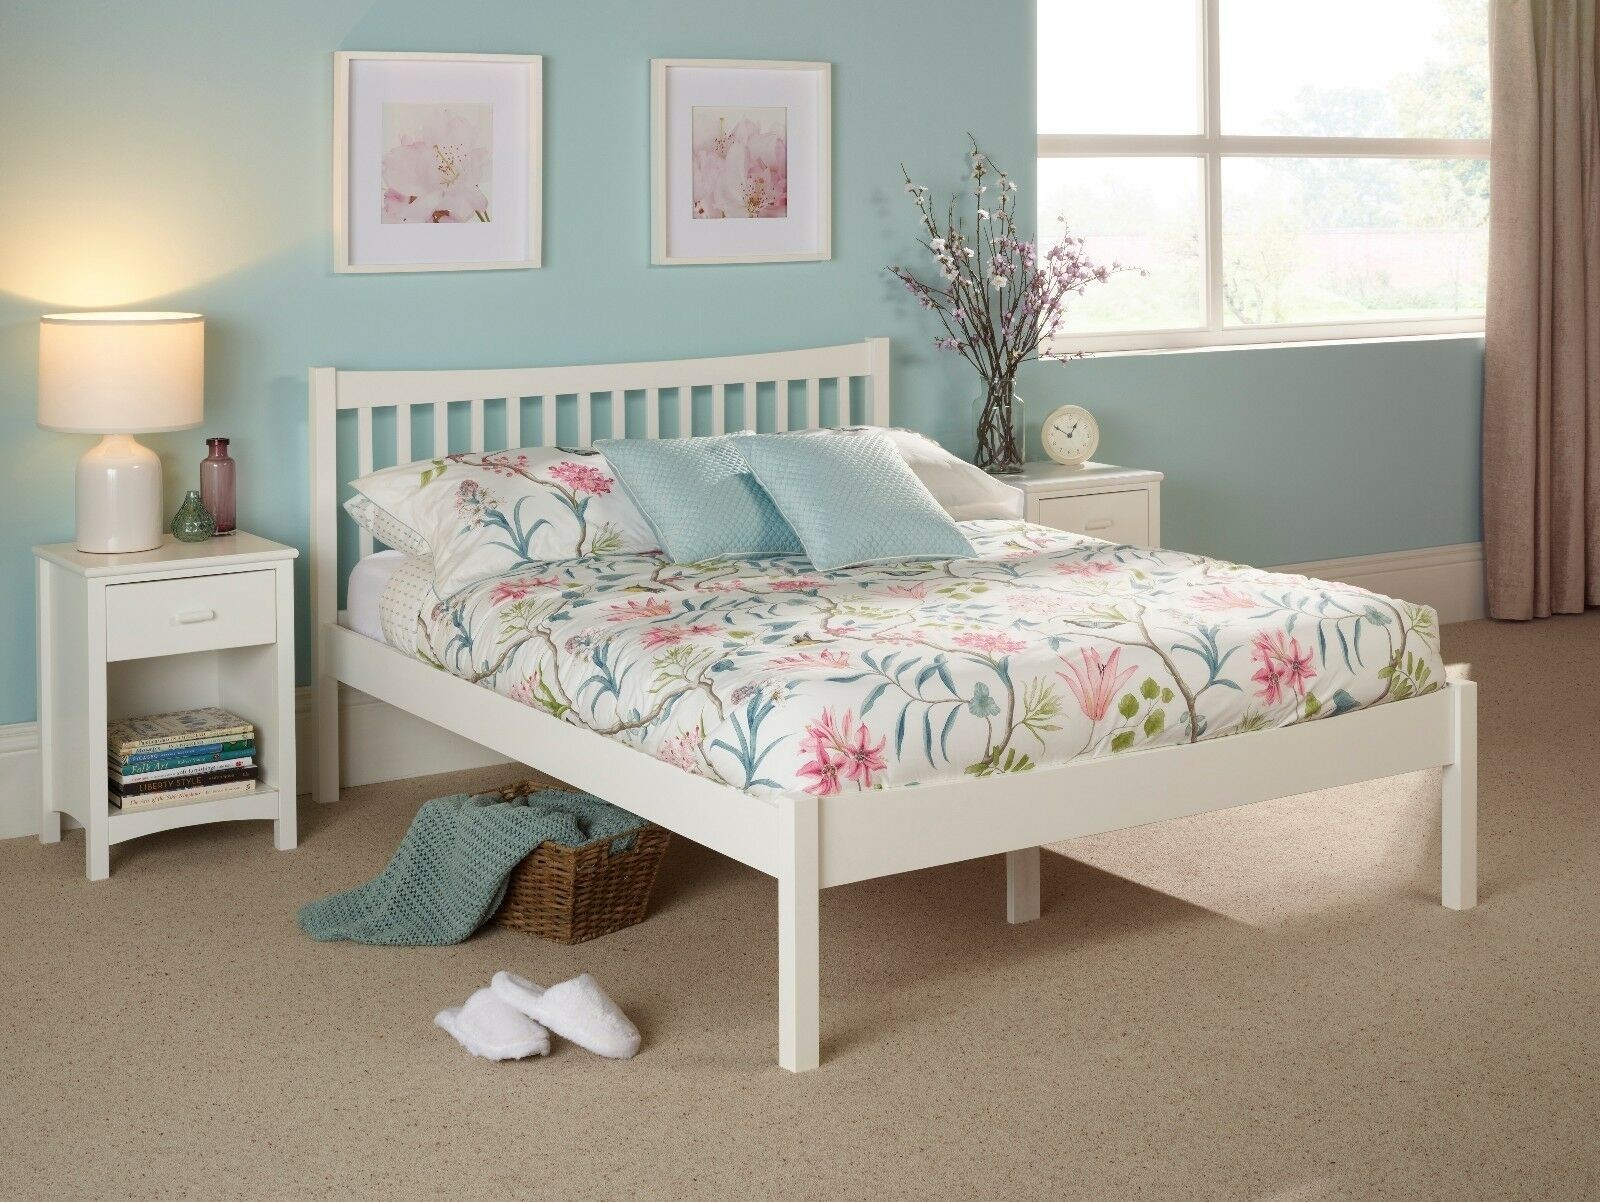 Nexus solid wood bed frame shaker style white slatted